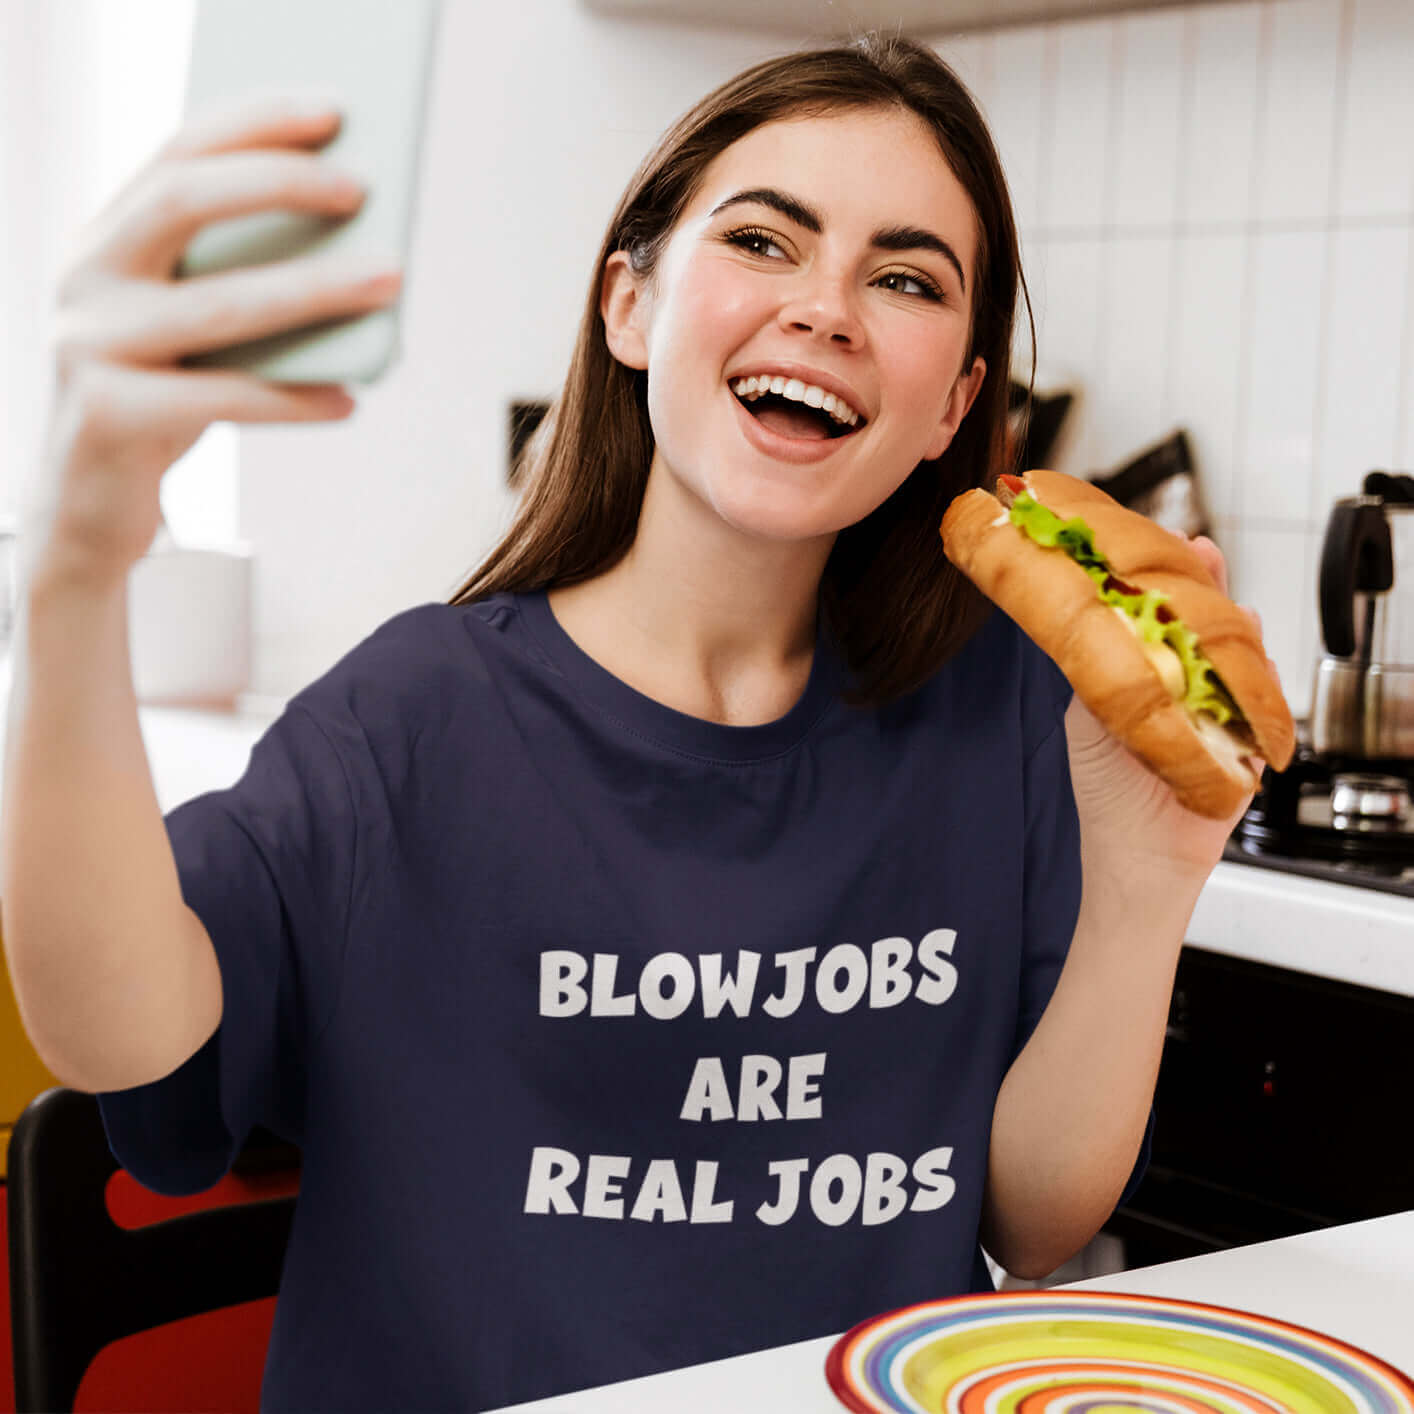 Woman holding a sub sandwich and wearing a navy blue t-shirt with the words Blowjobs are real jobs printed on the front.